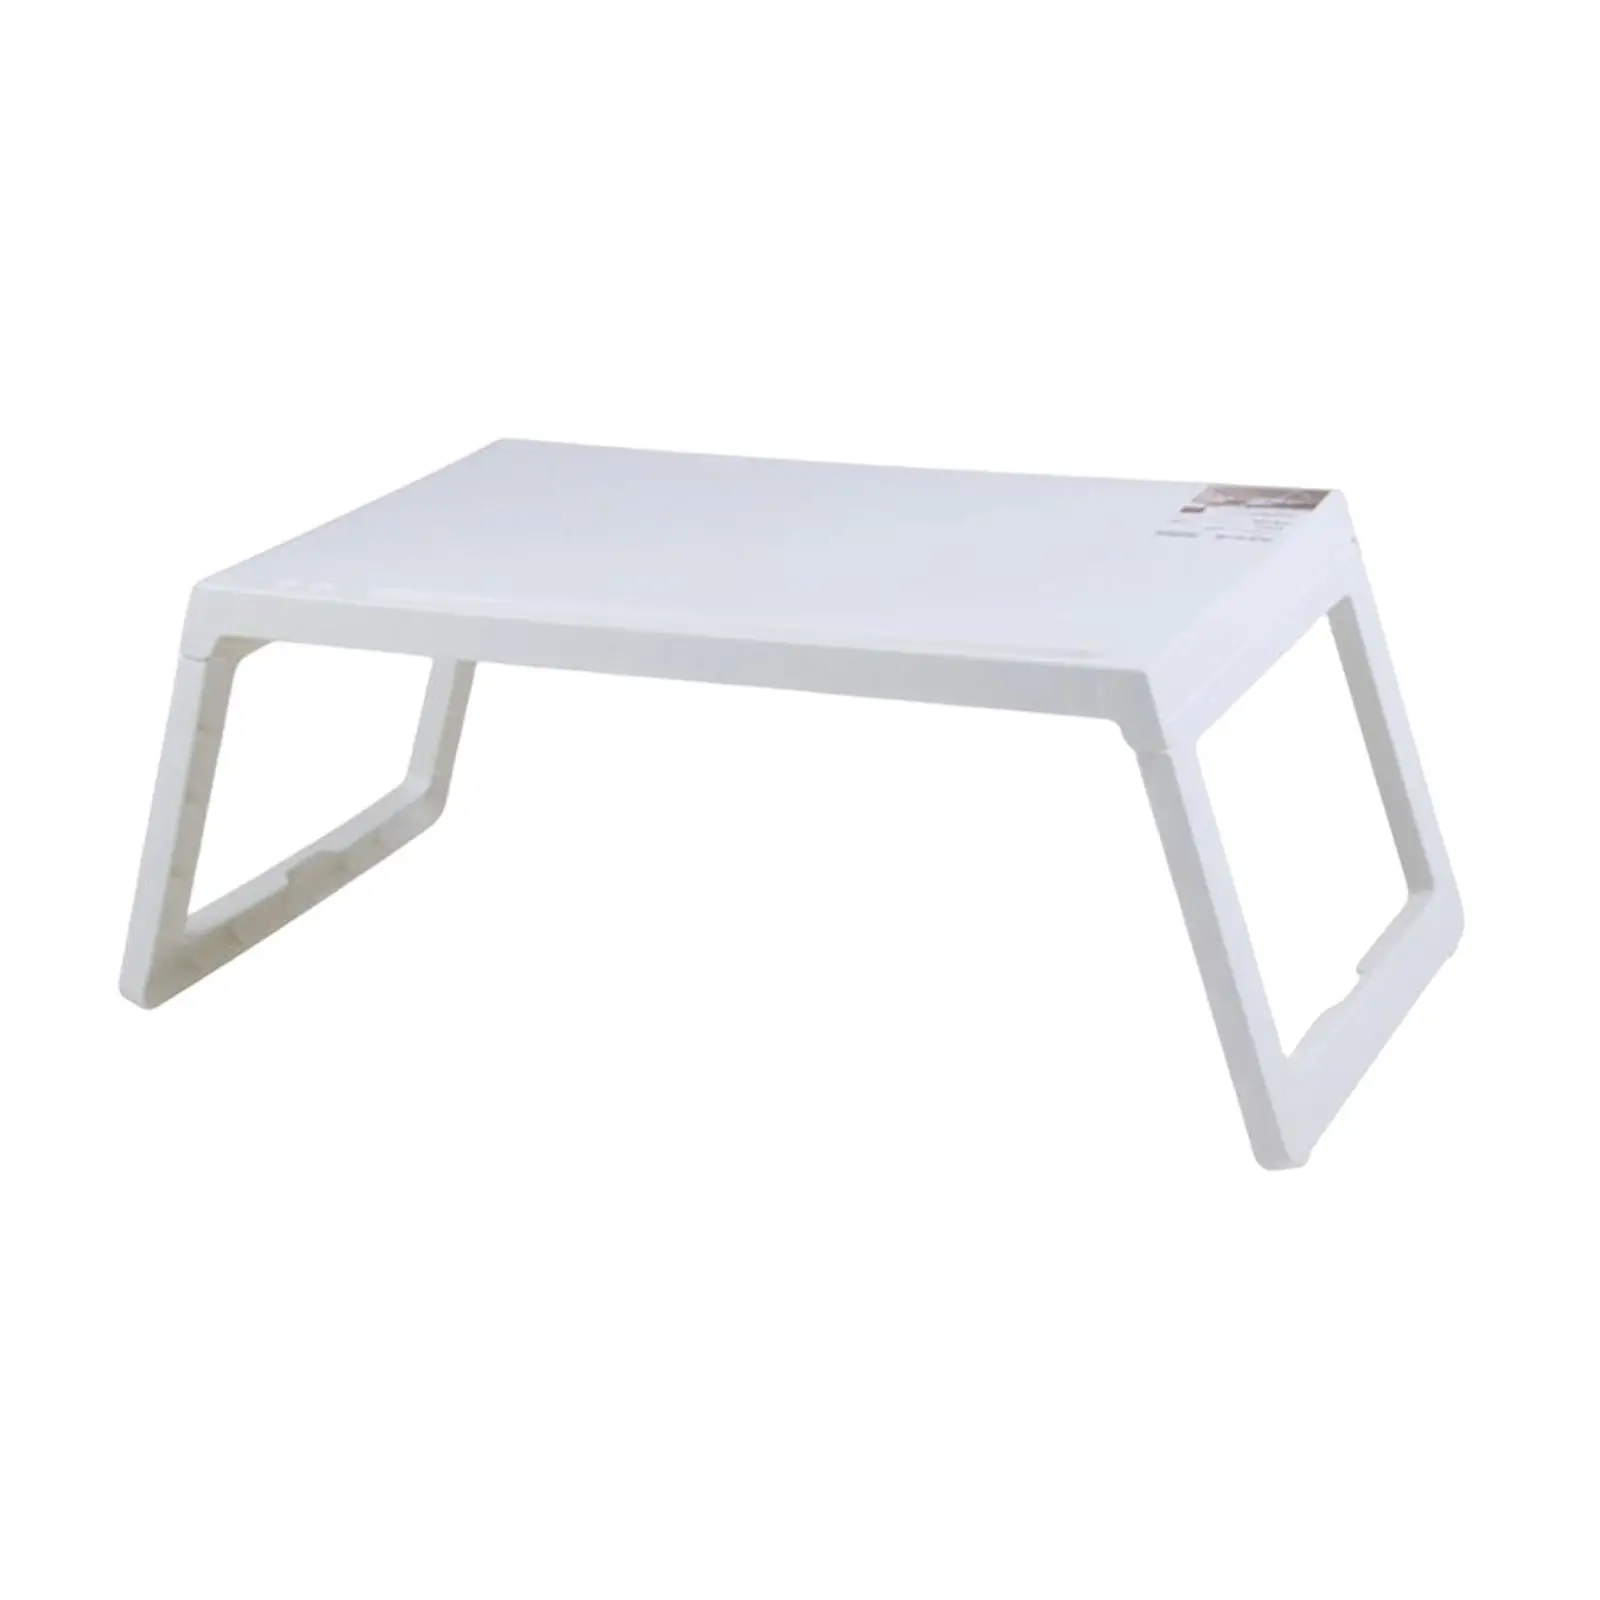 Creative Computer Desks lap Table Bed tray Table Serving Tray Stable Laptop Bed tray for Eating Breakfast Bed Dormitory Reading